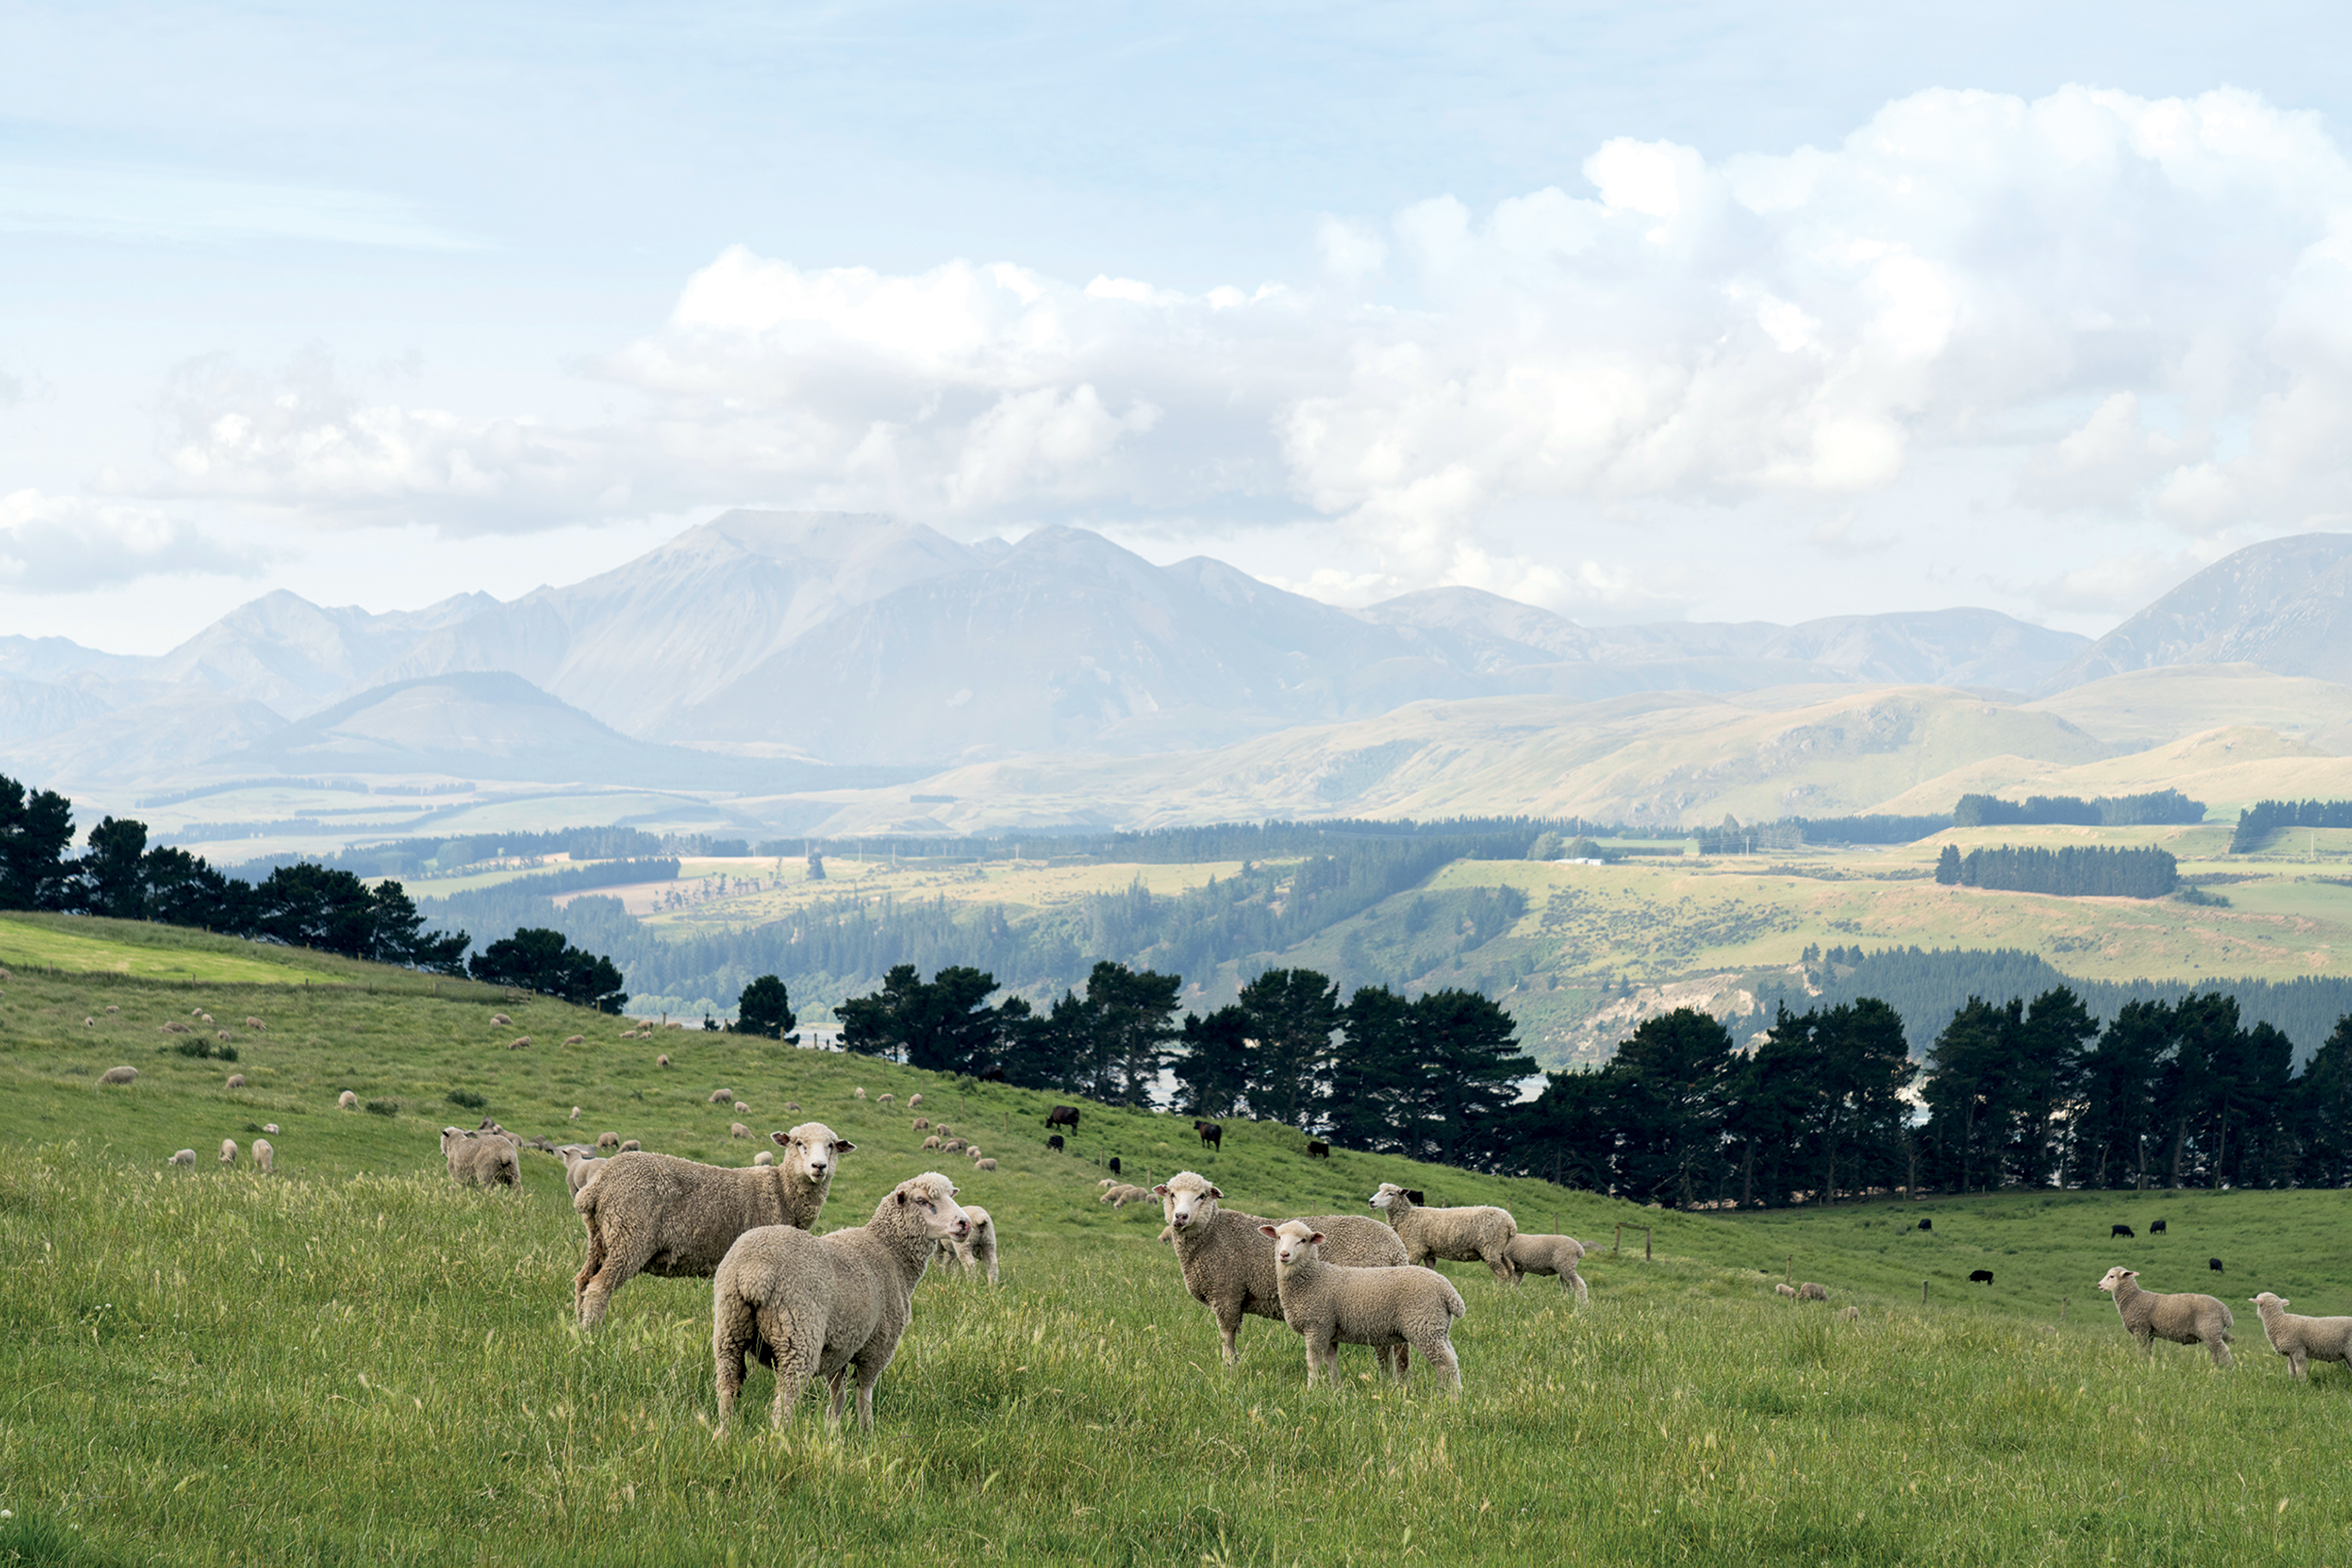 Sheep grazing over a scenic field